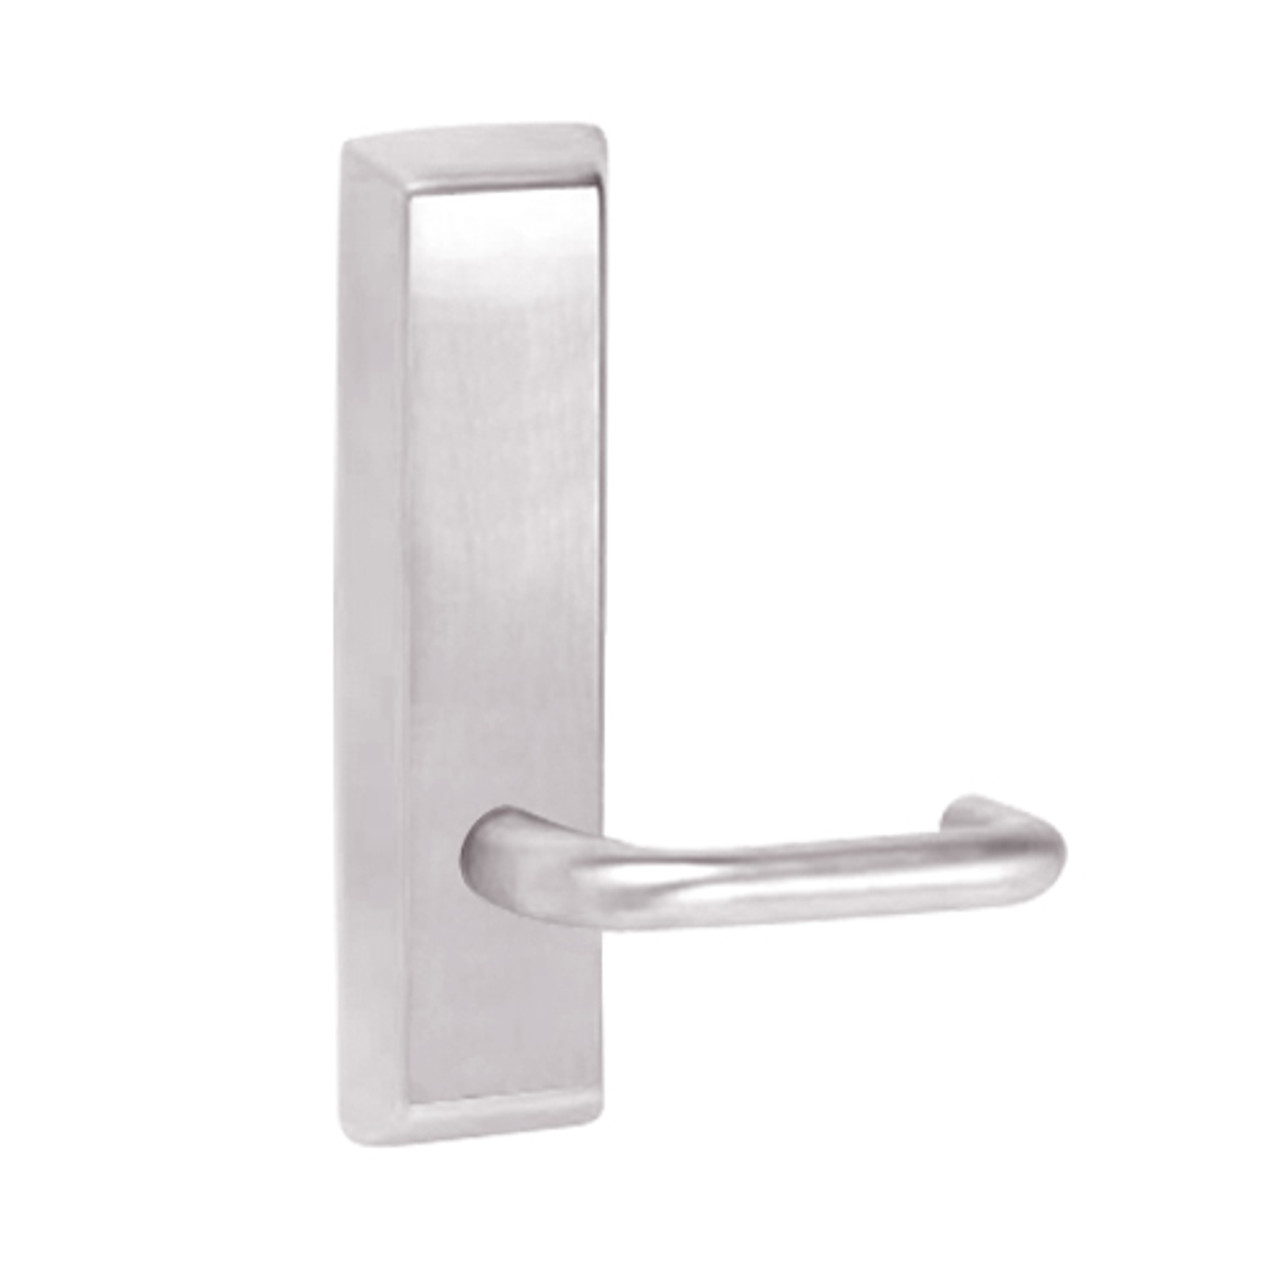 L955-629-LHR Corbin ED5000 Series Exit Device Trim with Classroom Lustra Lever in Bright Stainless Steel Finish